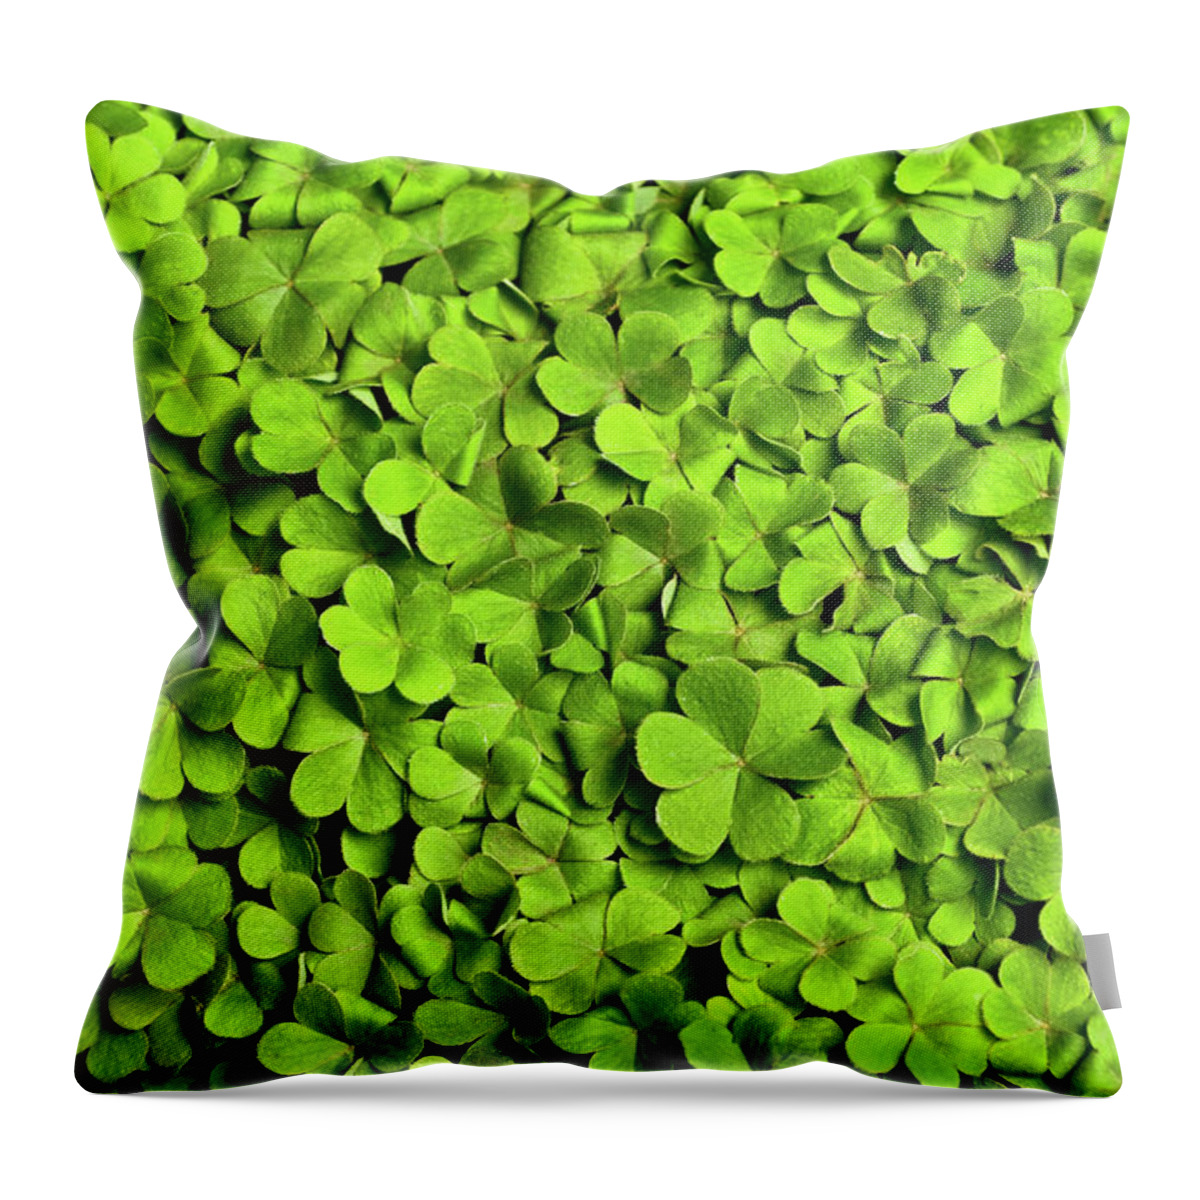 Leaf Throw Pillow featuring the photograph Bed Of Clover by Kledge